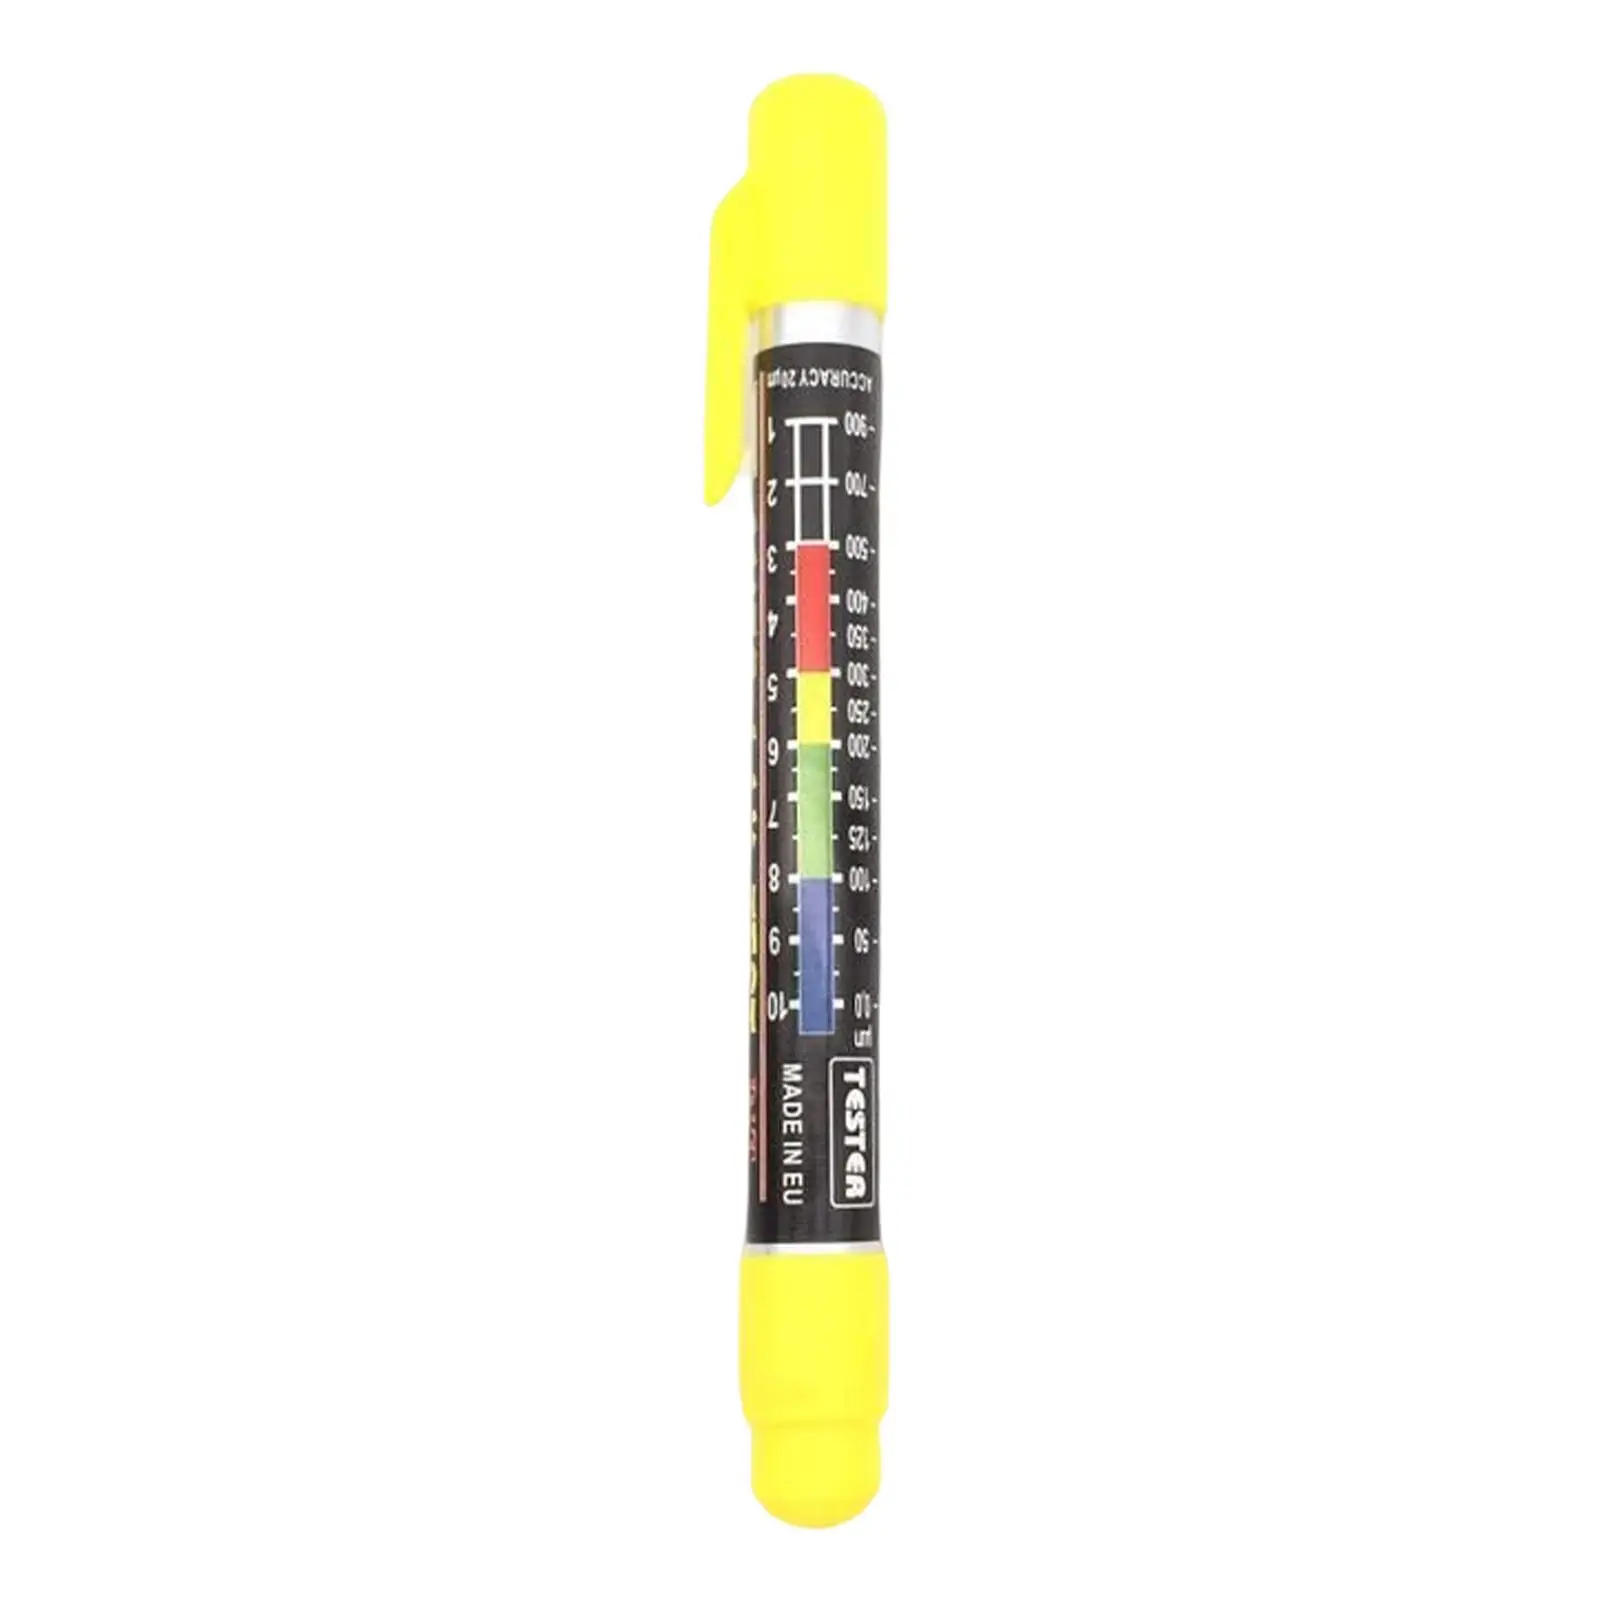 Paint Thickness Gauge Auto Paint Test Water Resistant Fits for Verifying Car